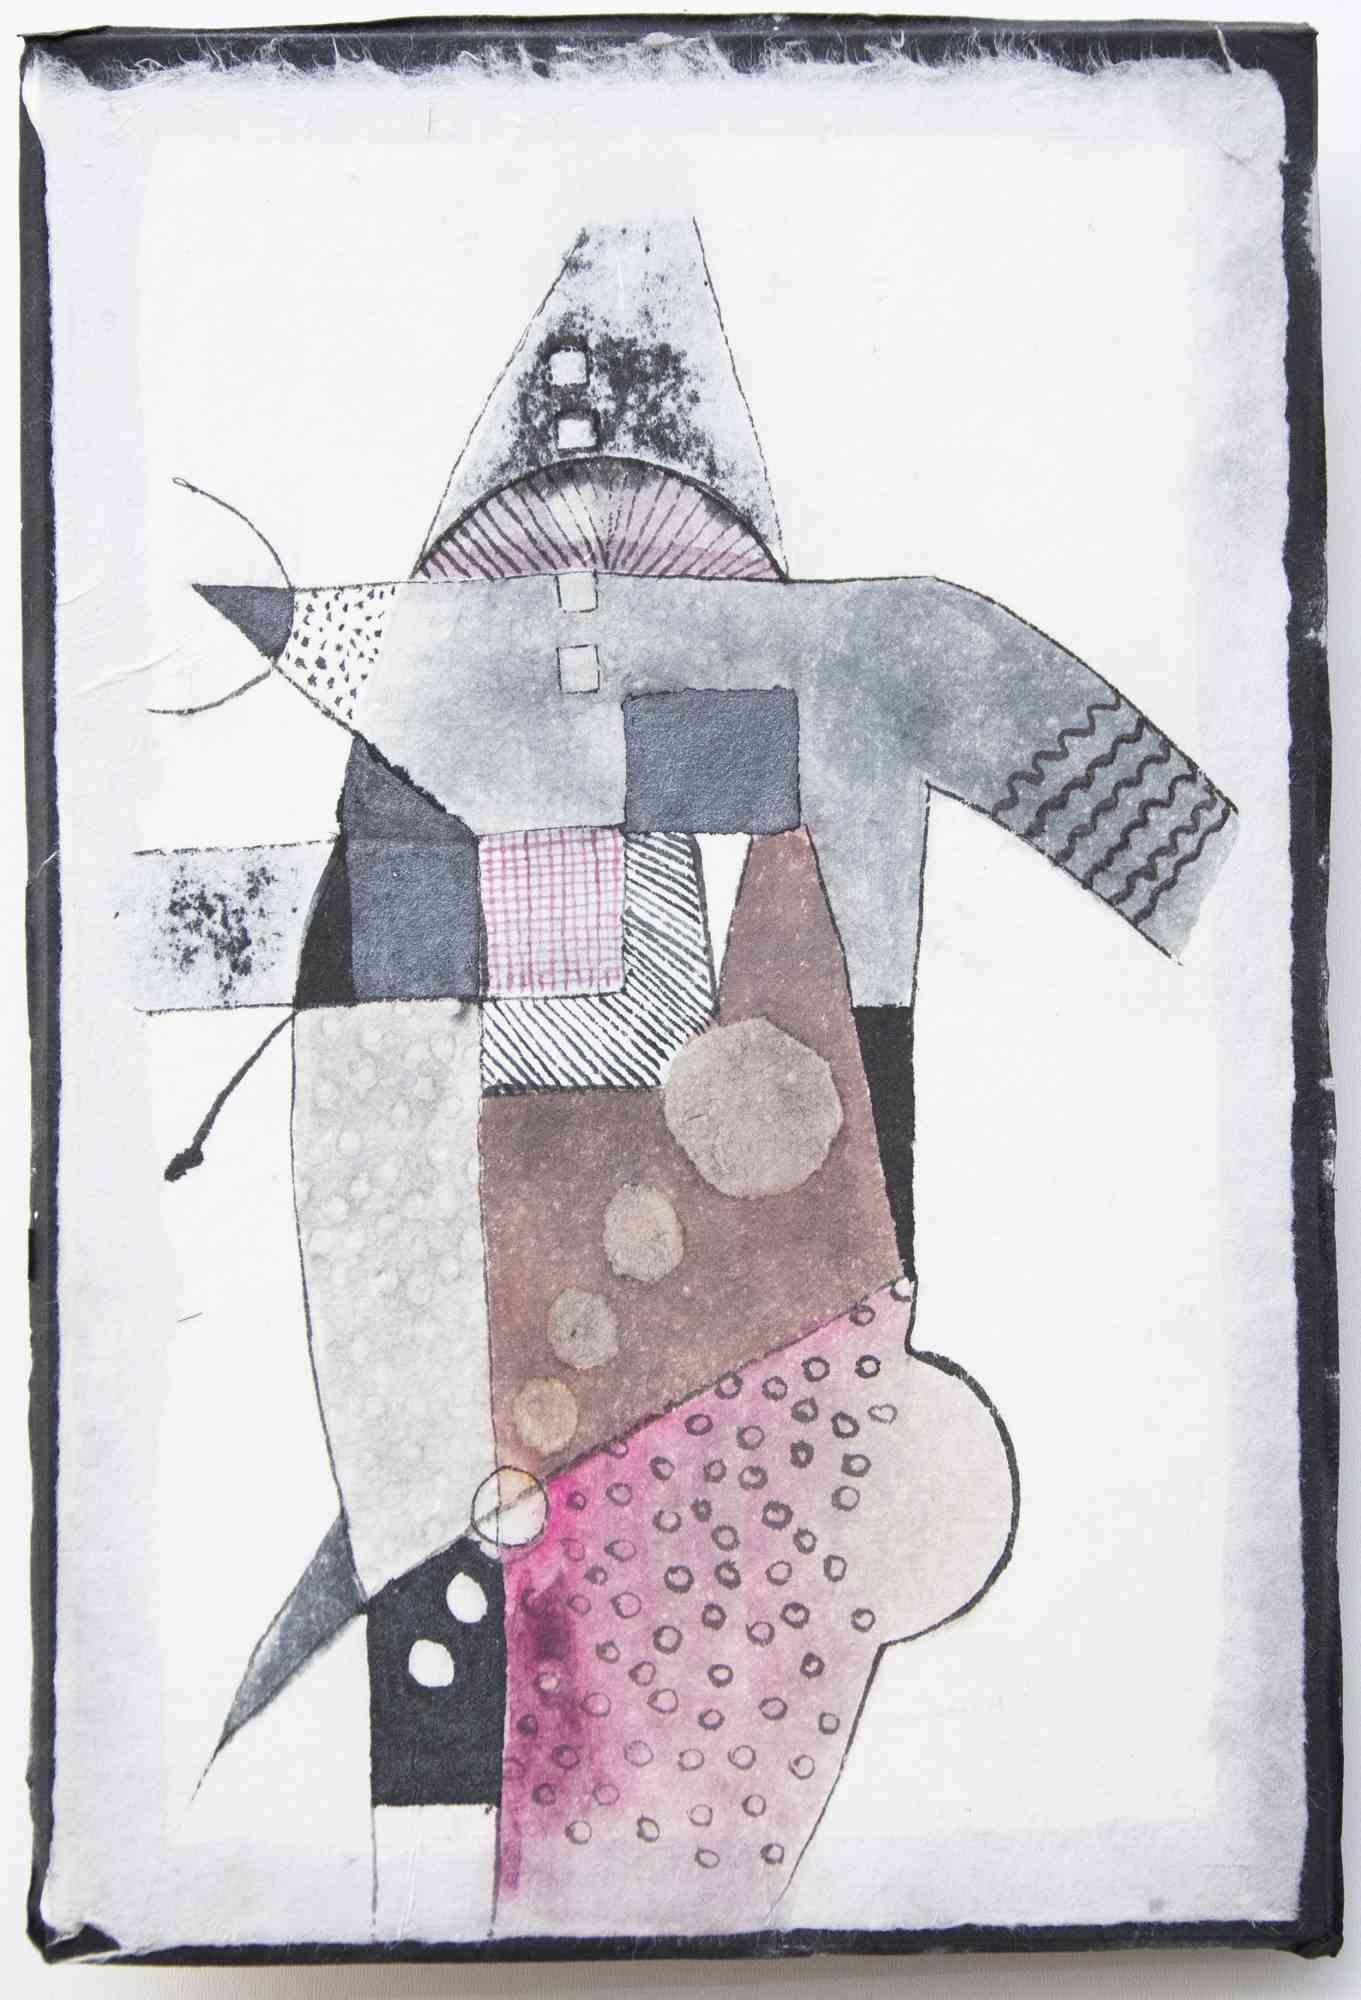 Abstract Composition - Mixed Media  - Late 20th Century - Mixed Media Art by Unknown